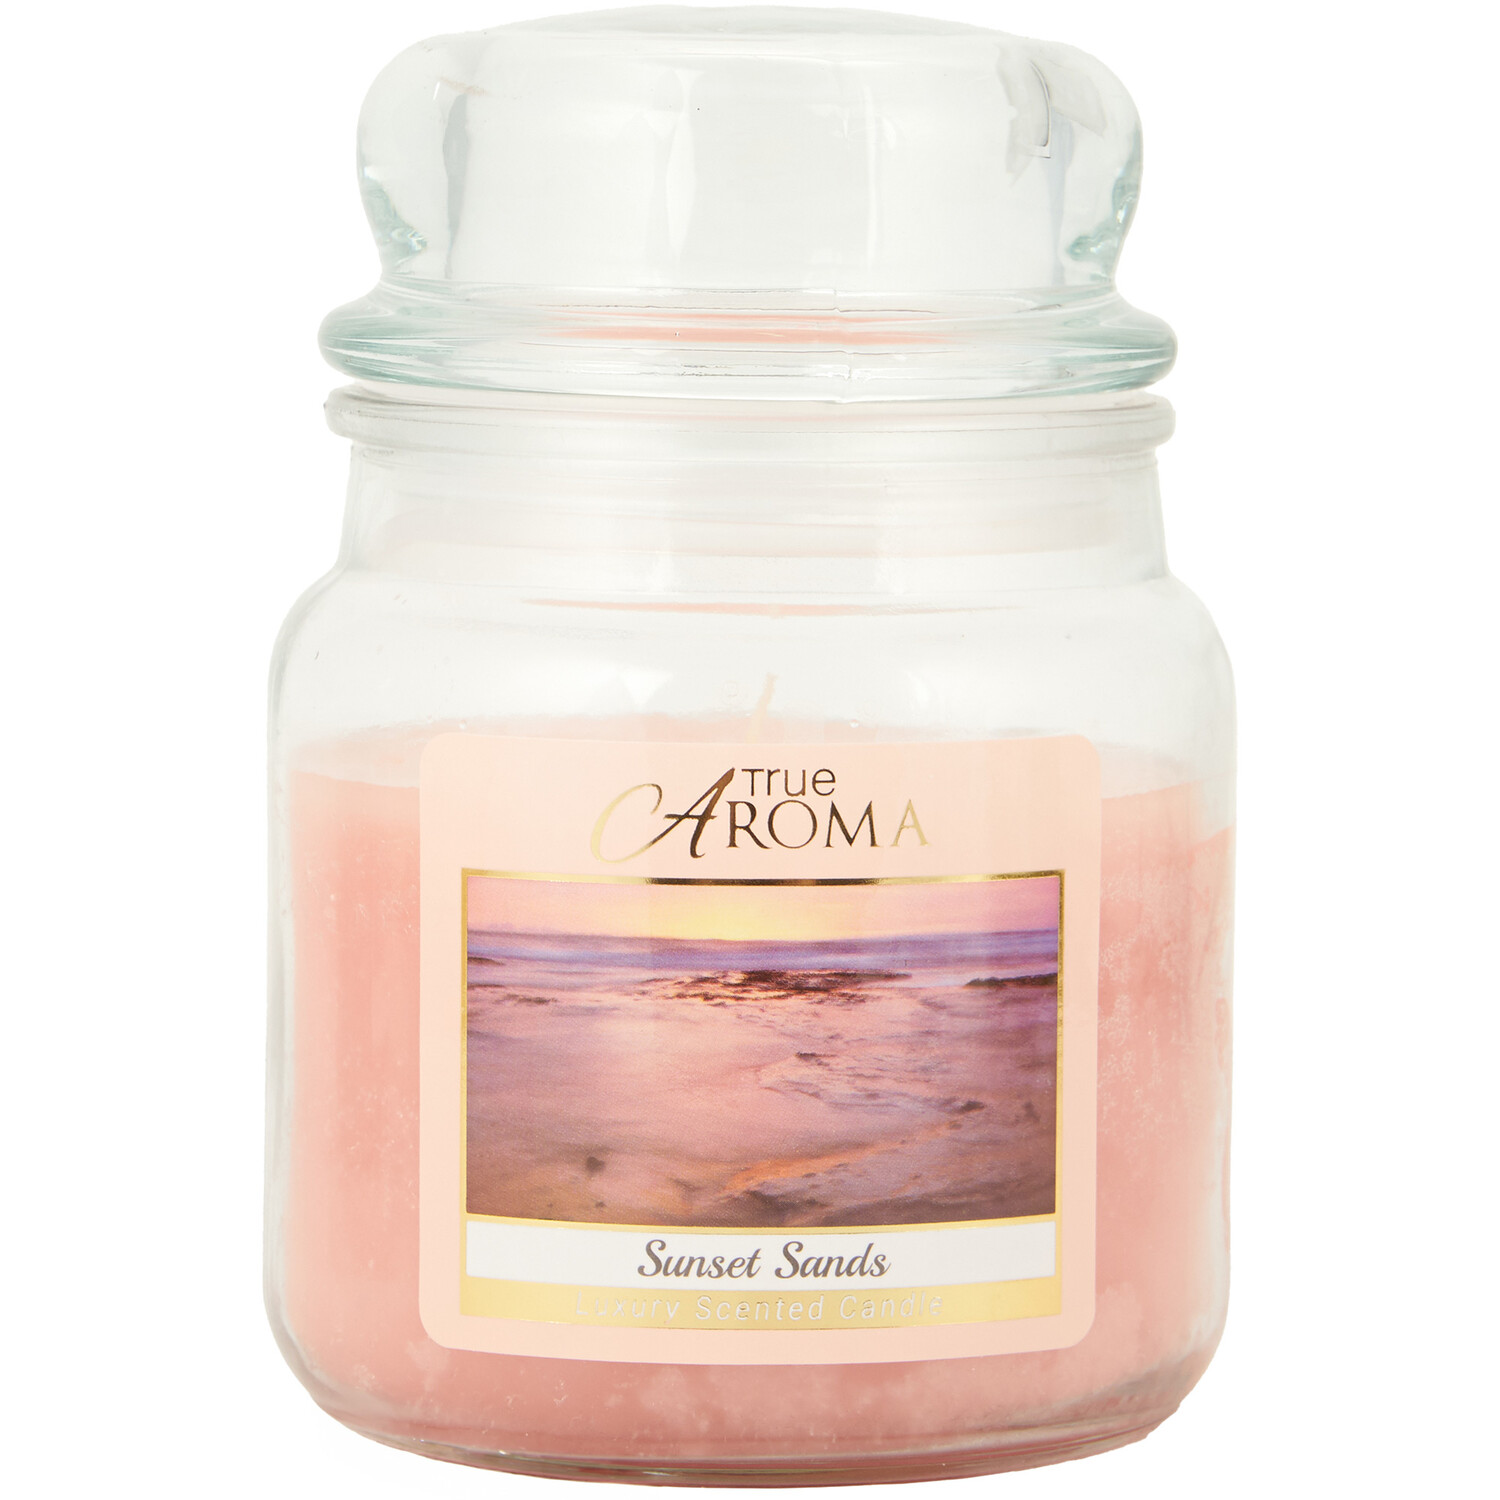 True Aroma Sunset Sands & Midnight Bloom Candle 2 Pack Image 4